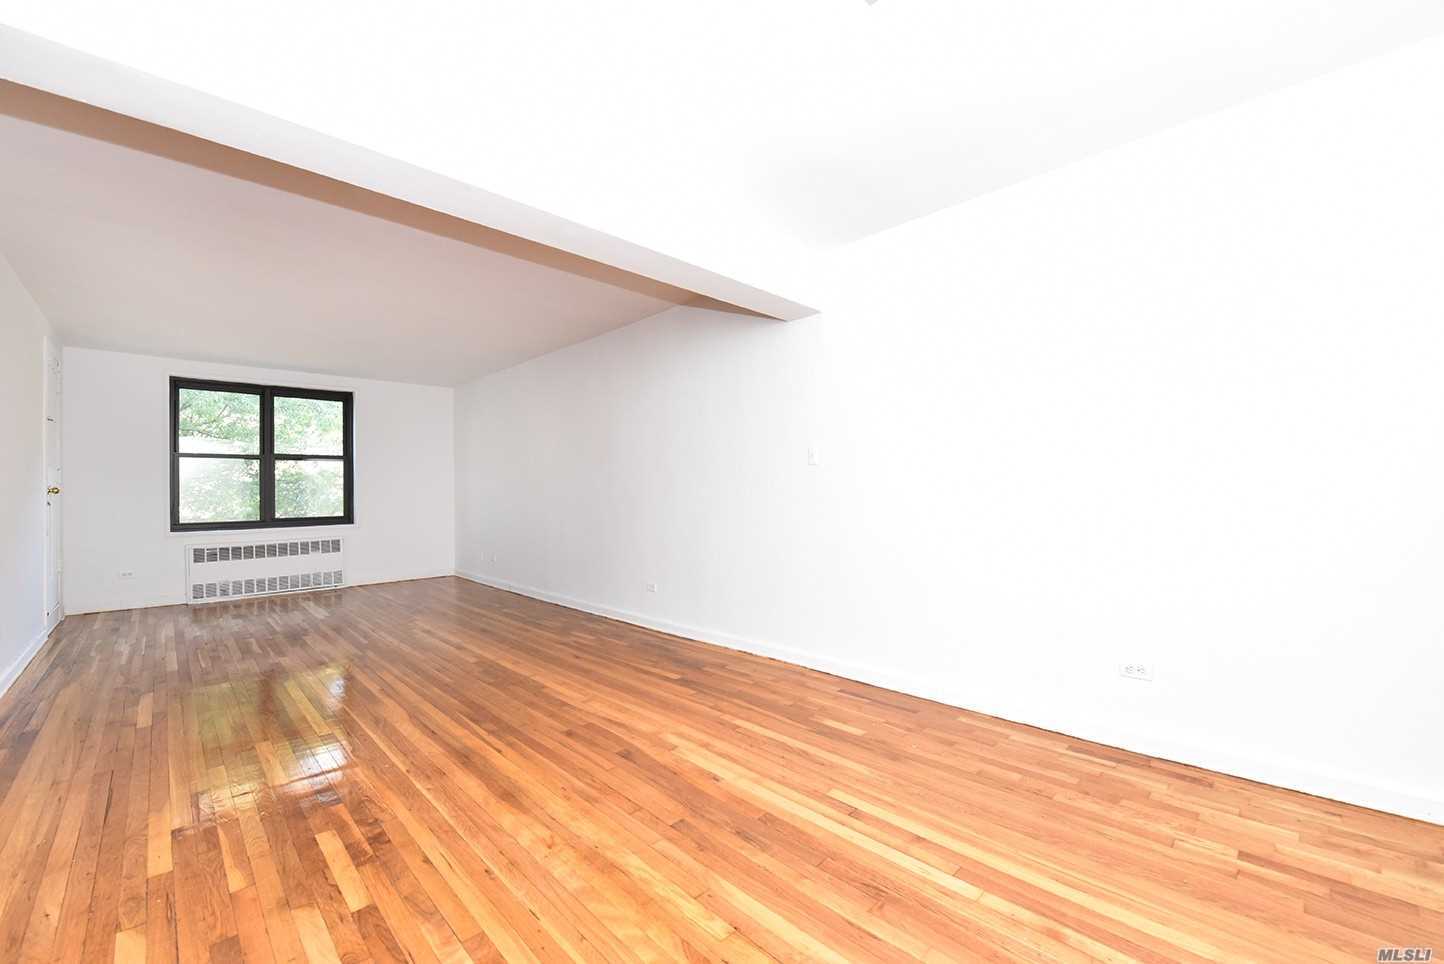 3 Bedroom apartment in the prestigious Eden Rock building. This pet friendly building features a doorman, laundry room, and a 24 hour gym. Conveniently located within minutes to buses, transportation, shopping, Briarwood Station, and the E and F trains.